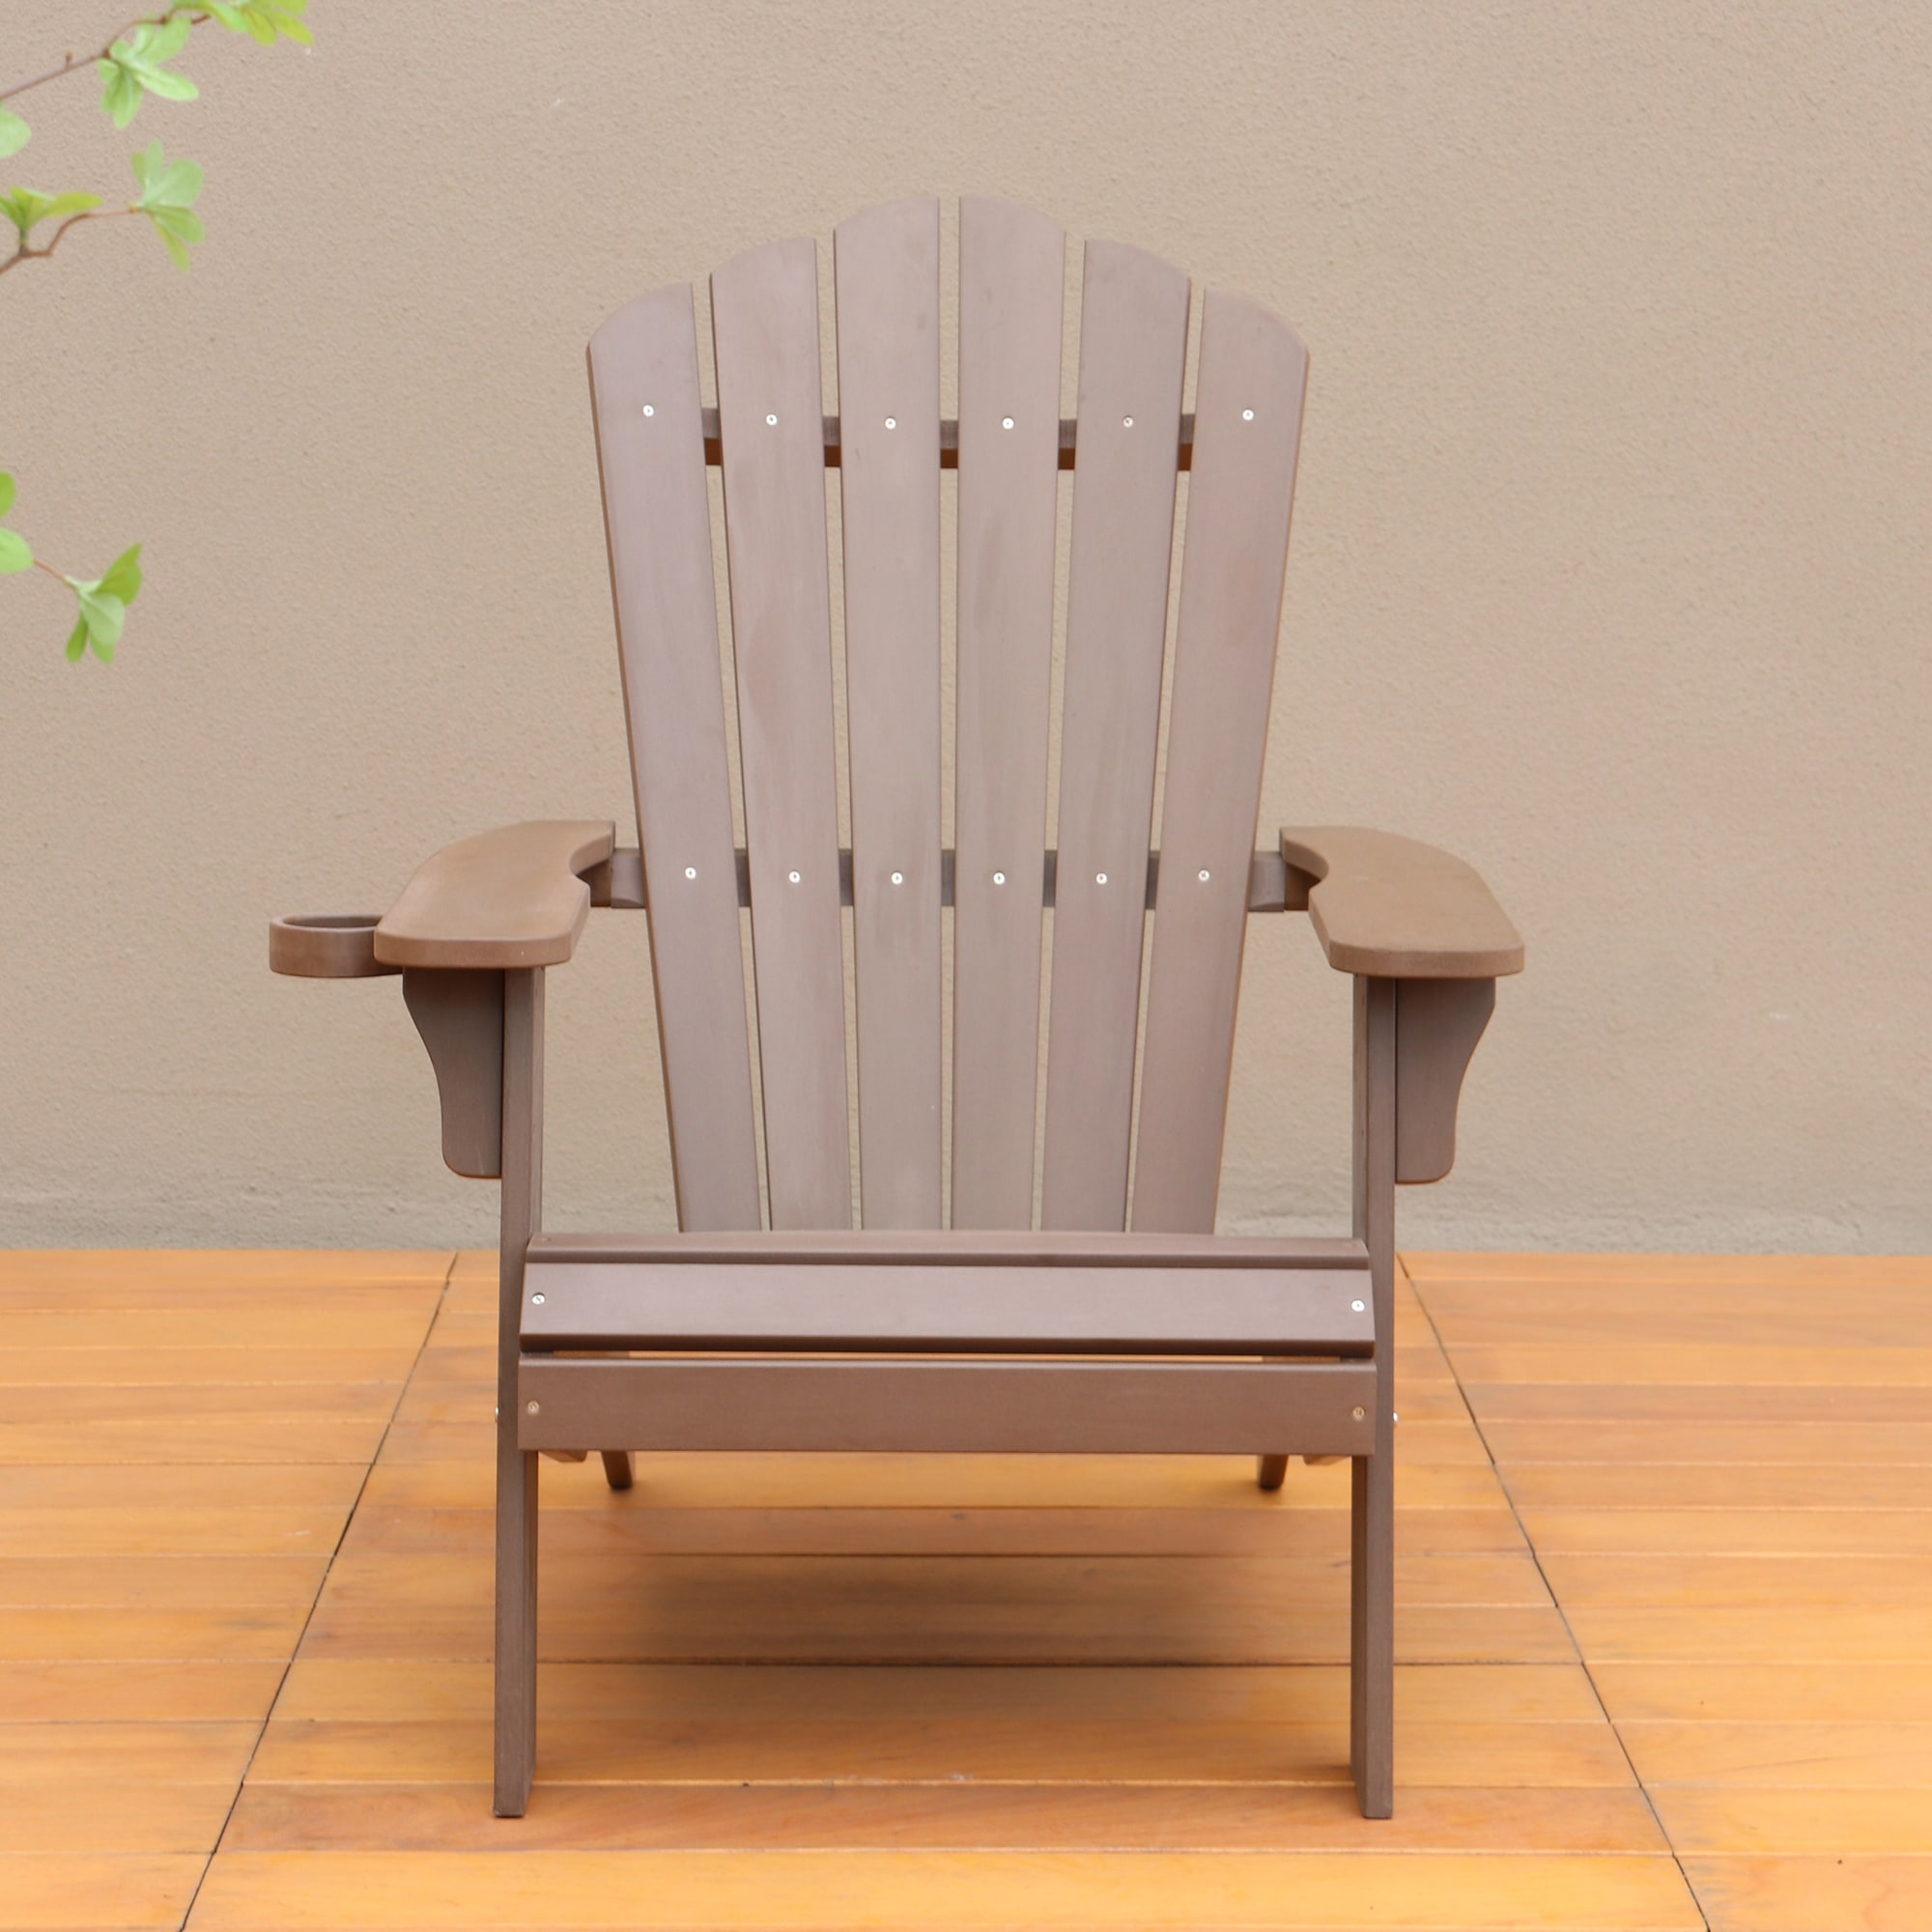 Polystyrene Adirondack Chair For Lawn Outdoor Patio Deck Garden Porch Lawn Furniture Chairs